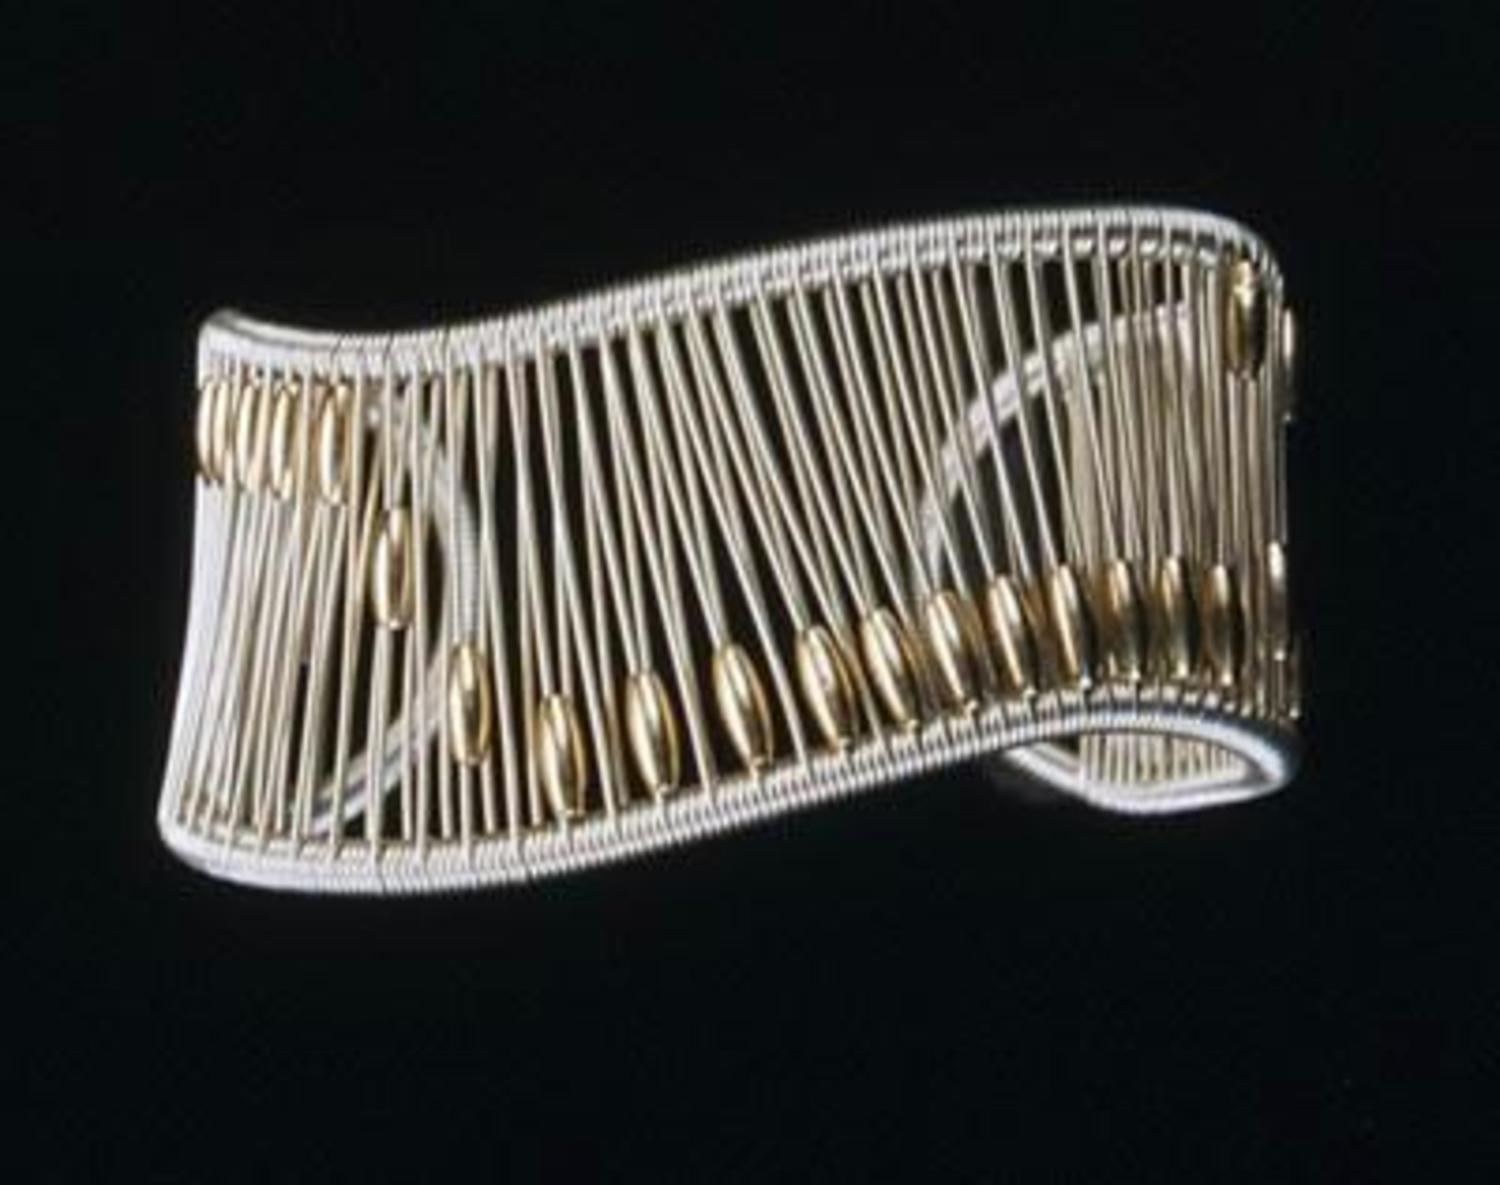 Acton - cuff 1 1/16" sterling silver wave with medium long gold fill tube beads